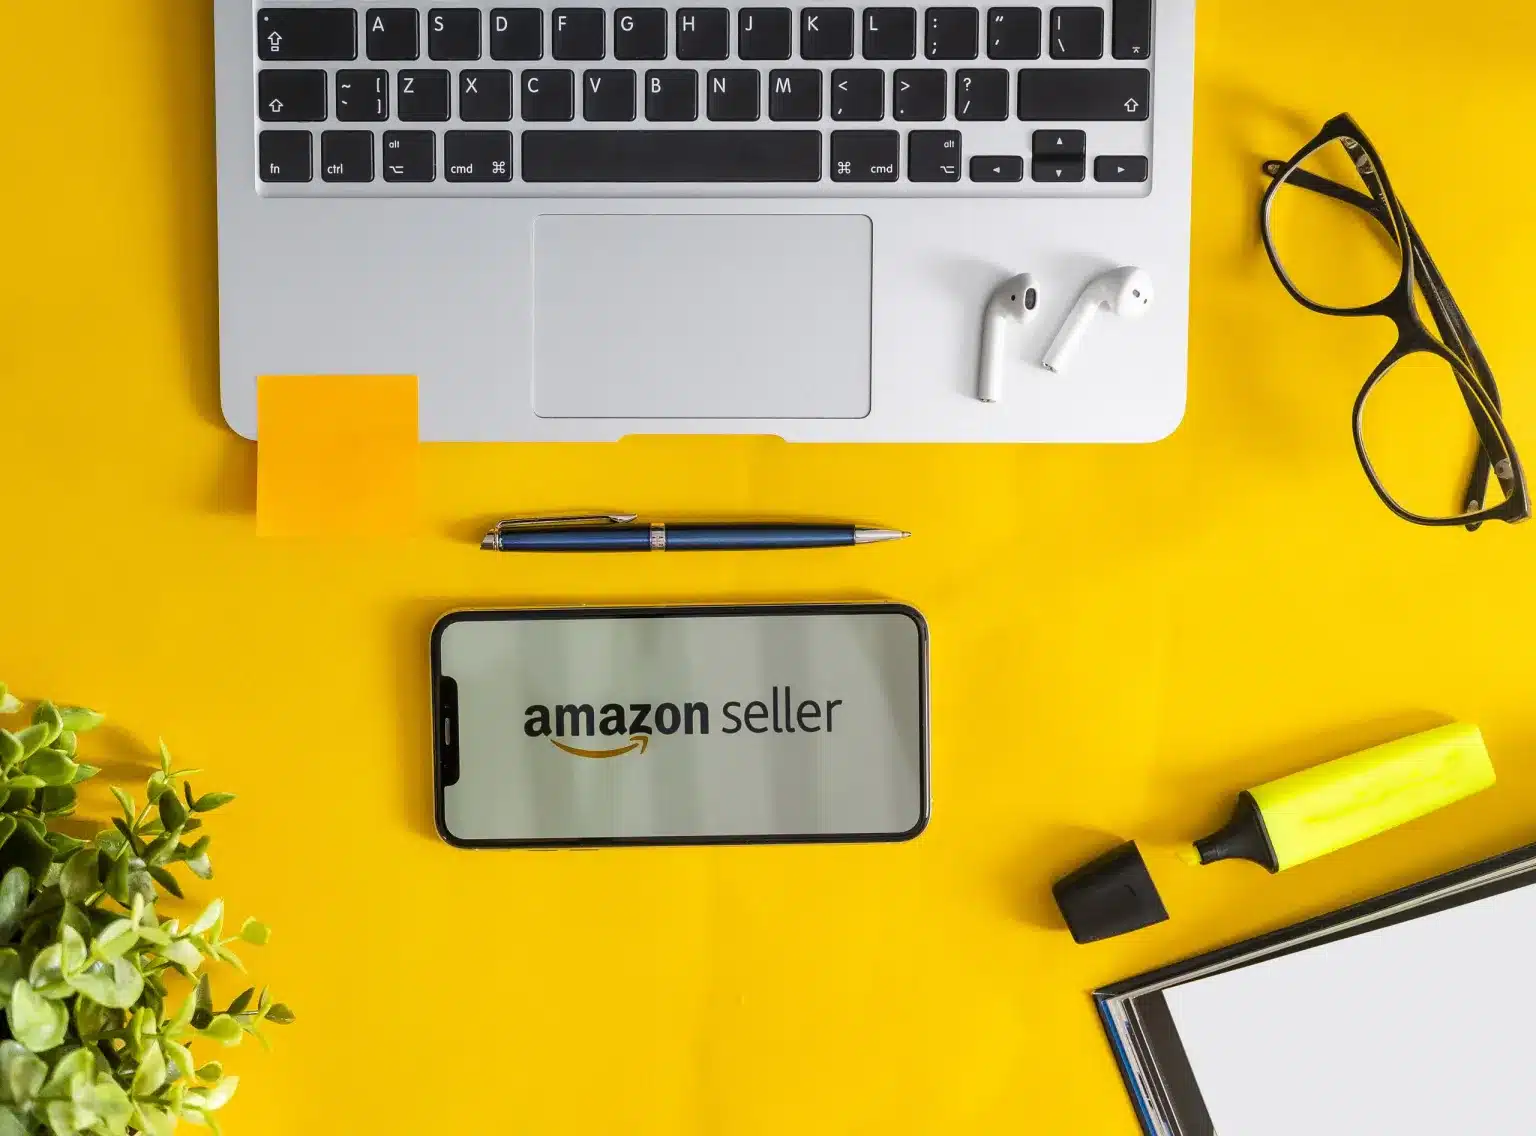 Amazon Seller Consulting Services